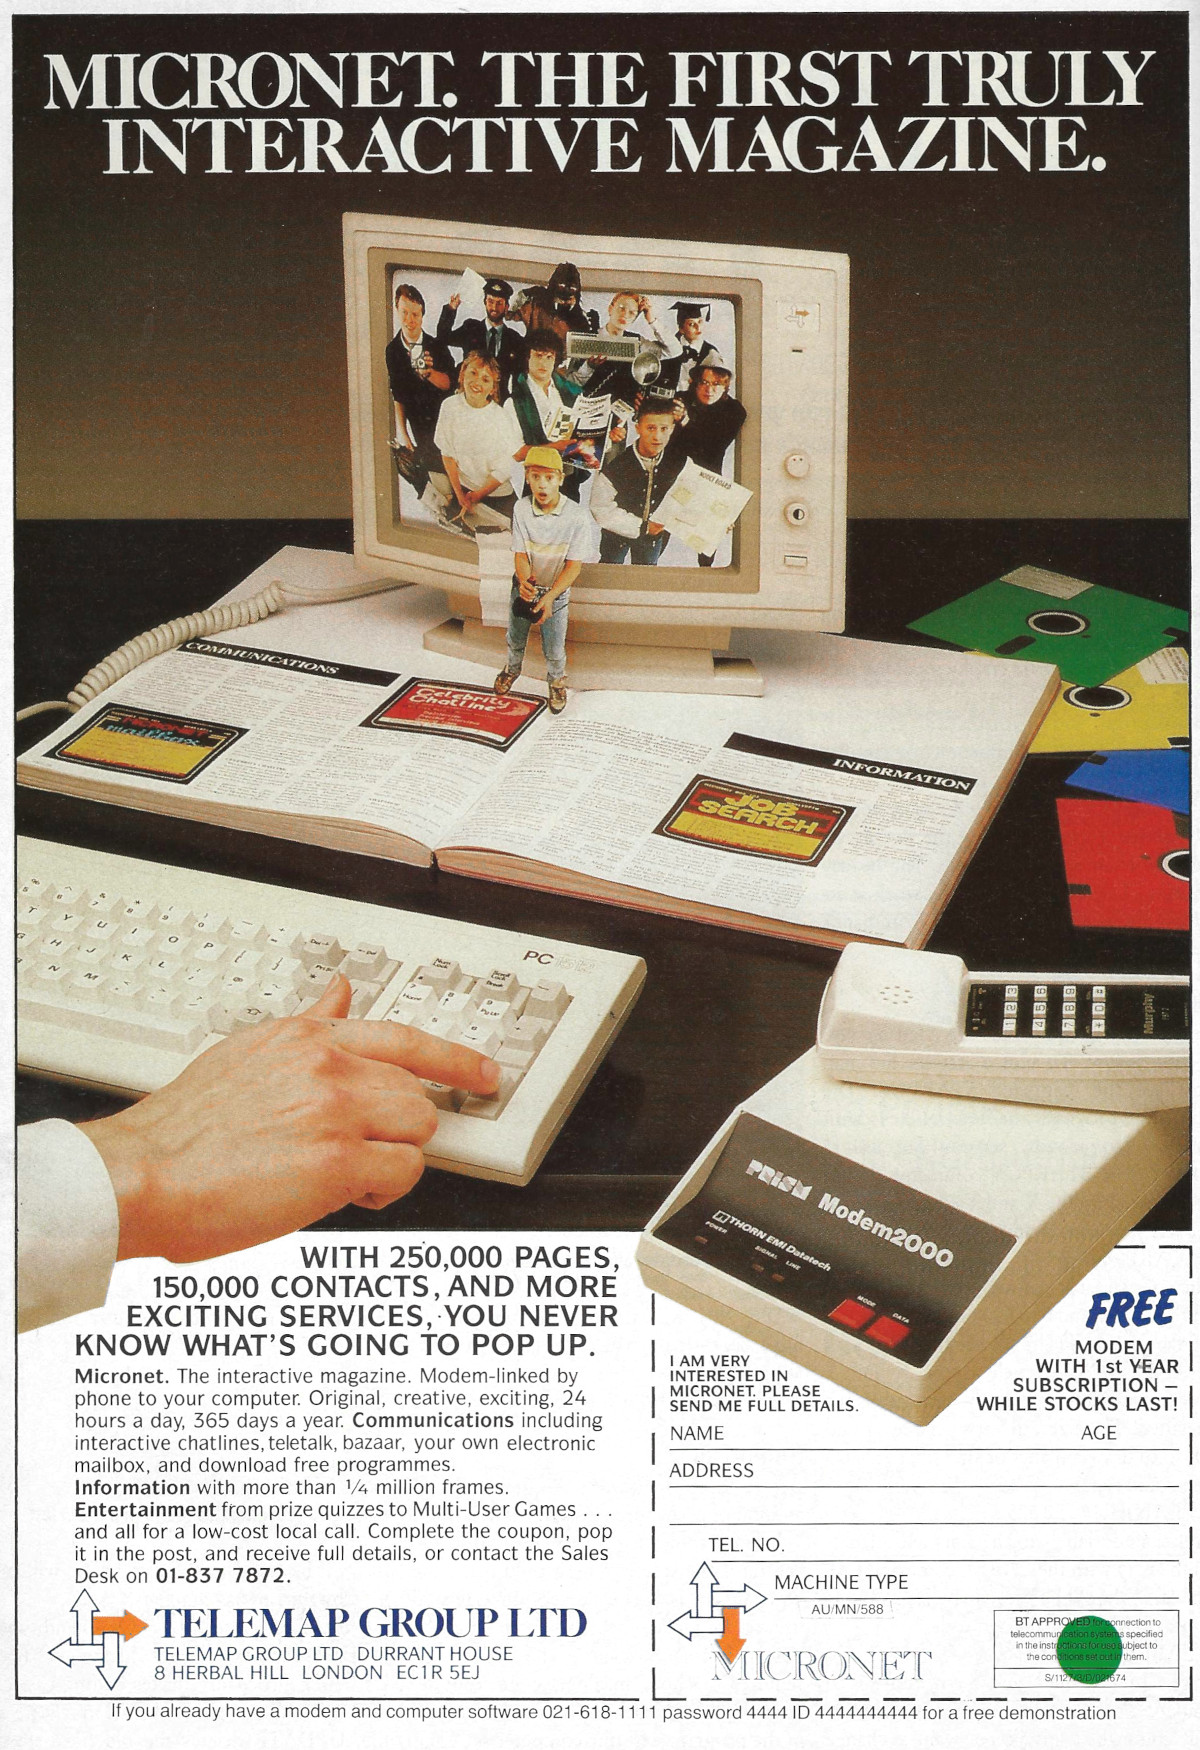 An advert for Telemap Micronet - the first truly interactive magazine. From Acorn User, May 1988